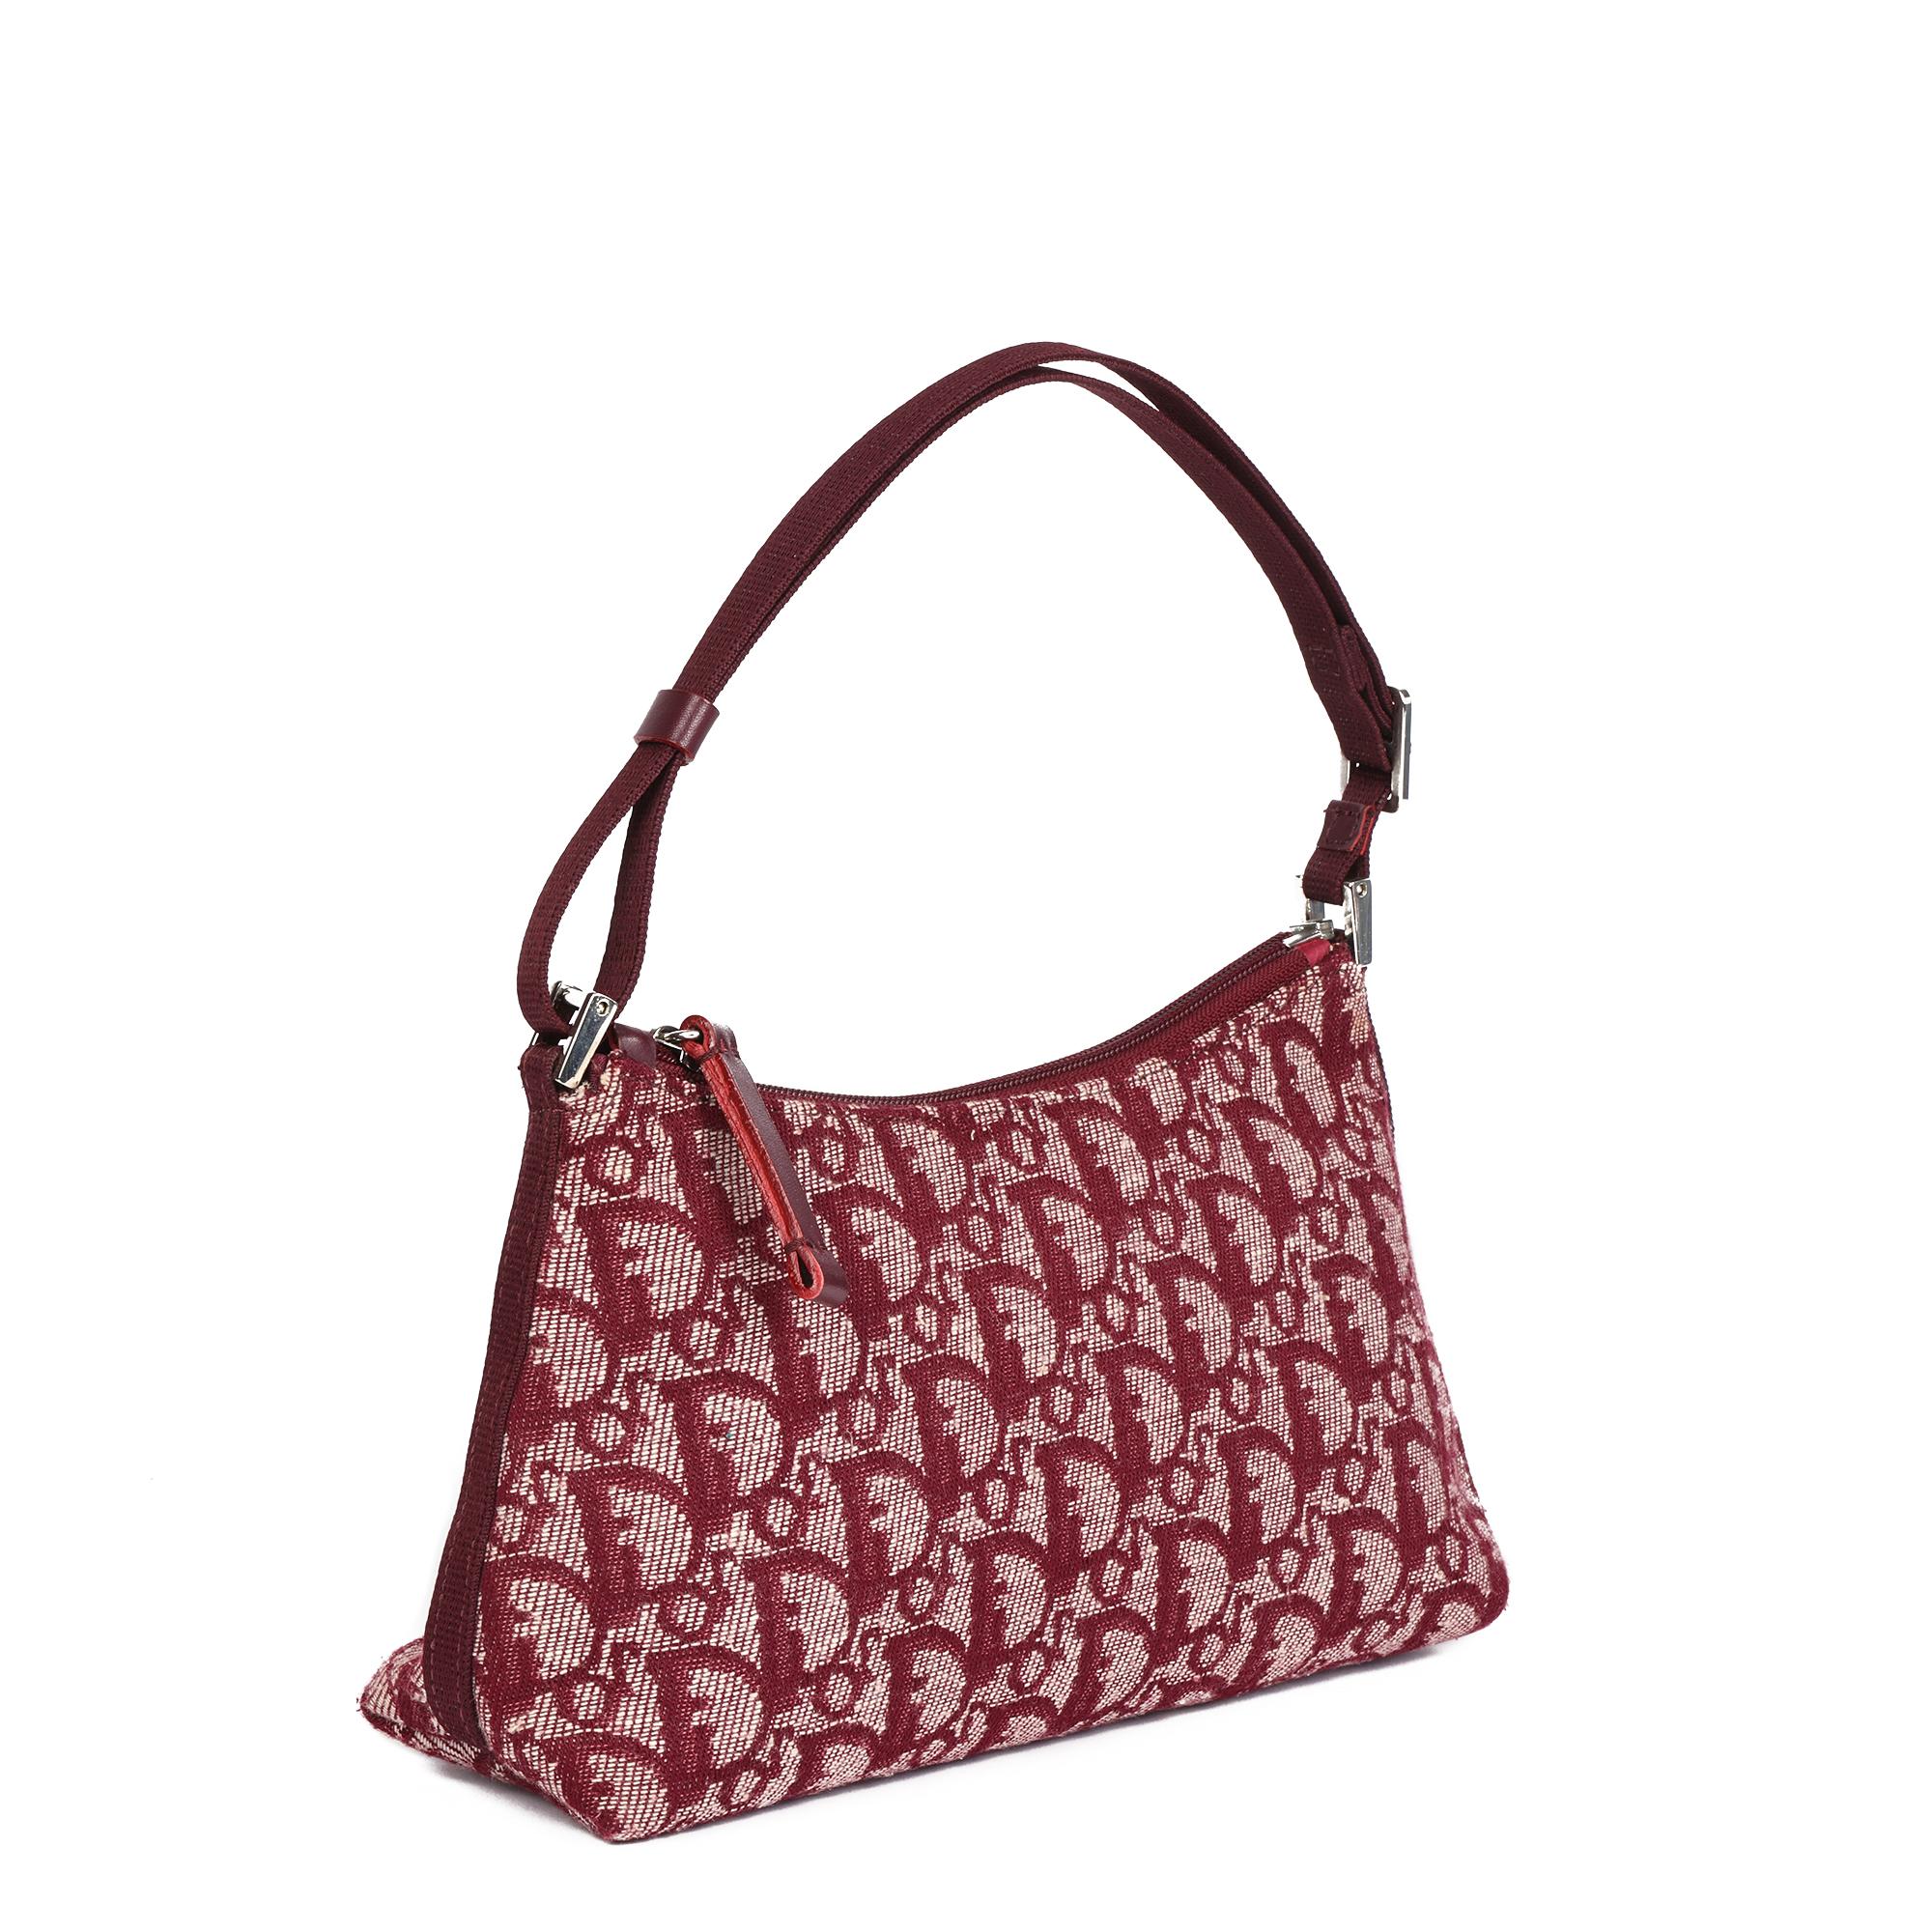 CHRISTIAN DIOR
Bordeaux Monogram Canvas Pochette

Serial Number: BO B 0121
Age (Circa): 2011
Authenticity Details: Date Stamp (Made in Italy)
Gender: Ladies
Type: Shoulder

Colour: Bordeaux
Hardware: SIlver
Material(s): Canvas
Interior: Red